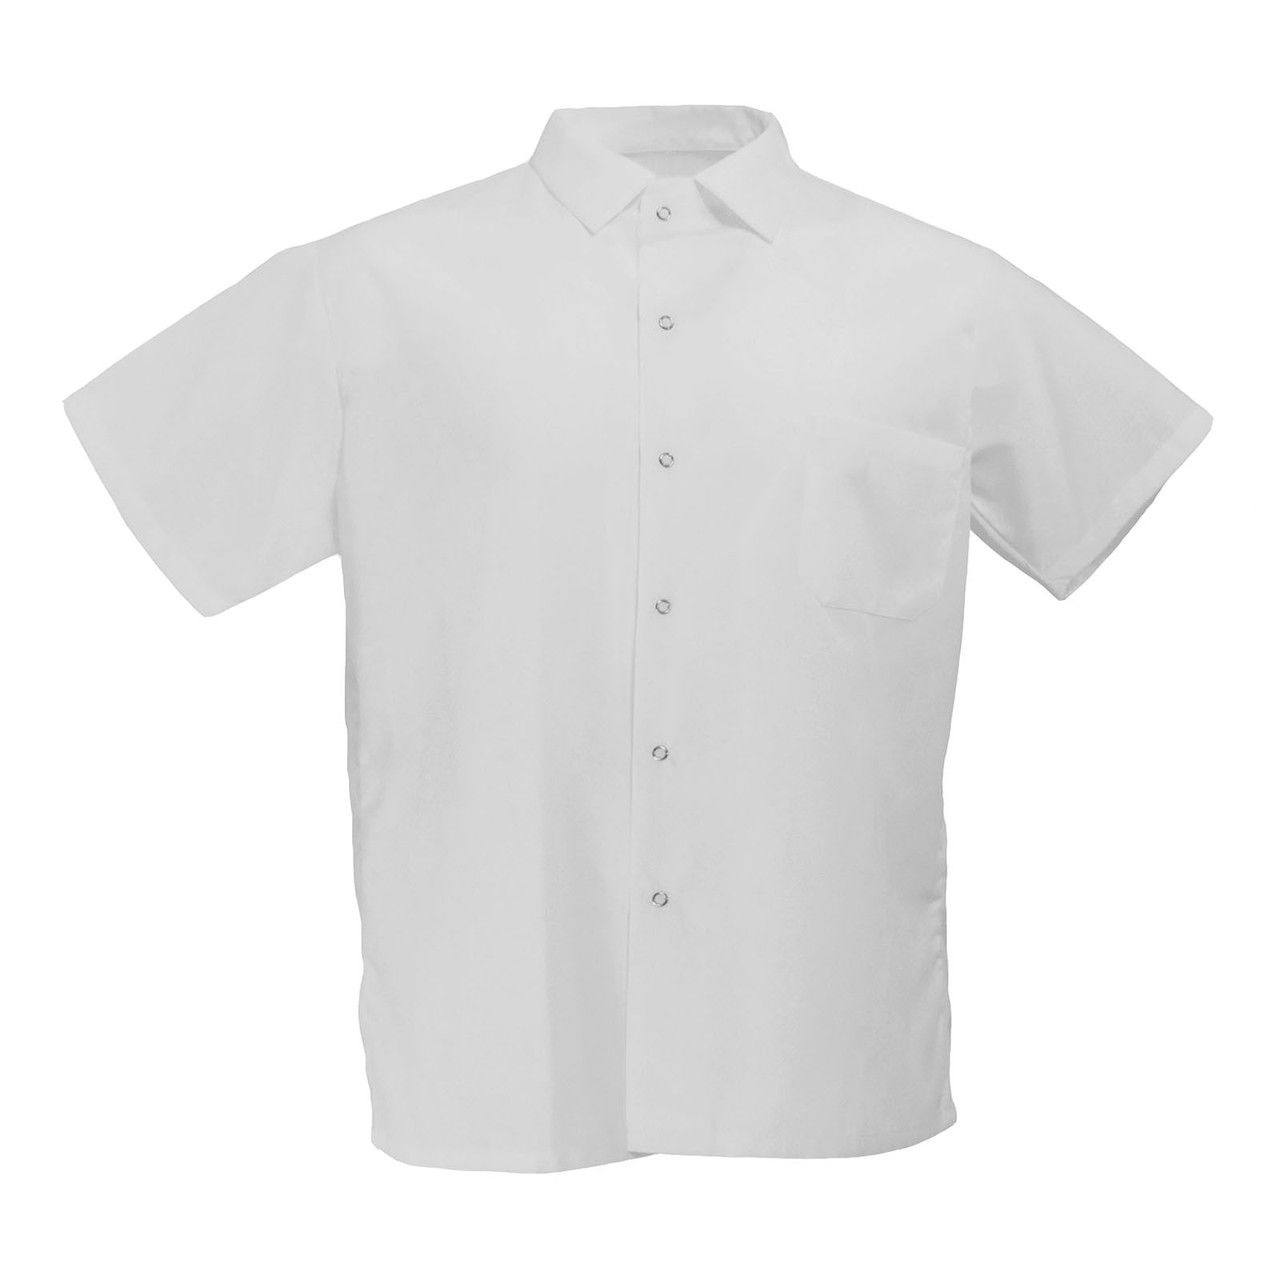 What is your description of the overall aesthetic of Chef Trend S102 chef white shirts?